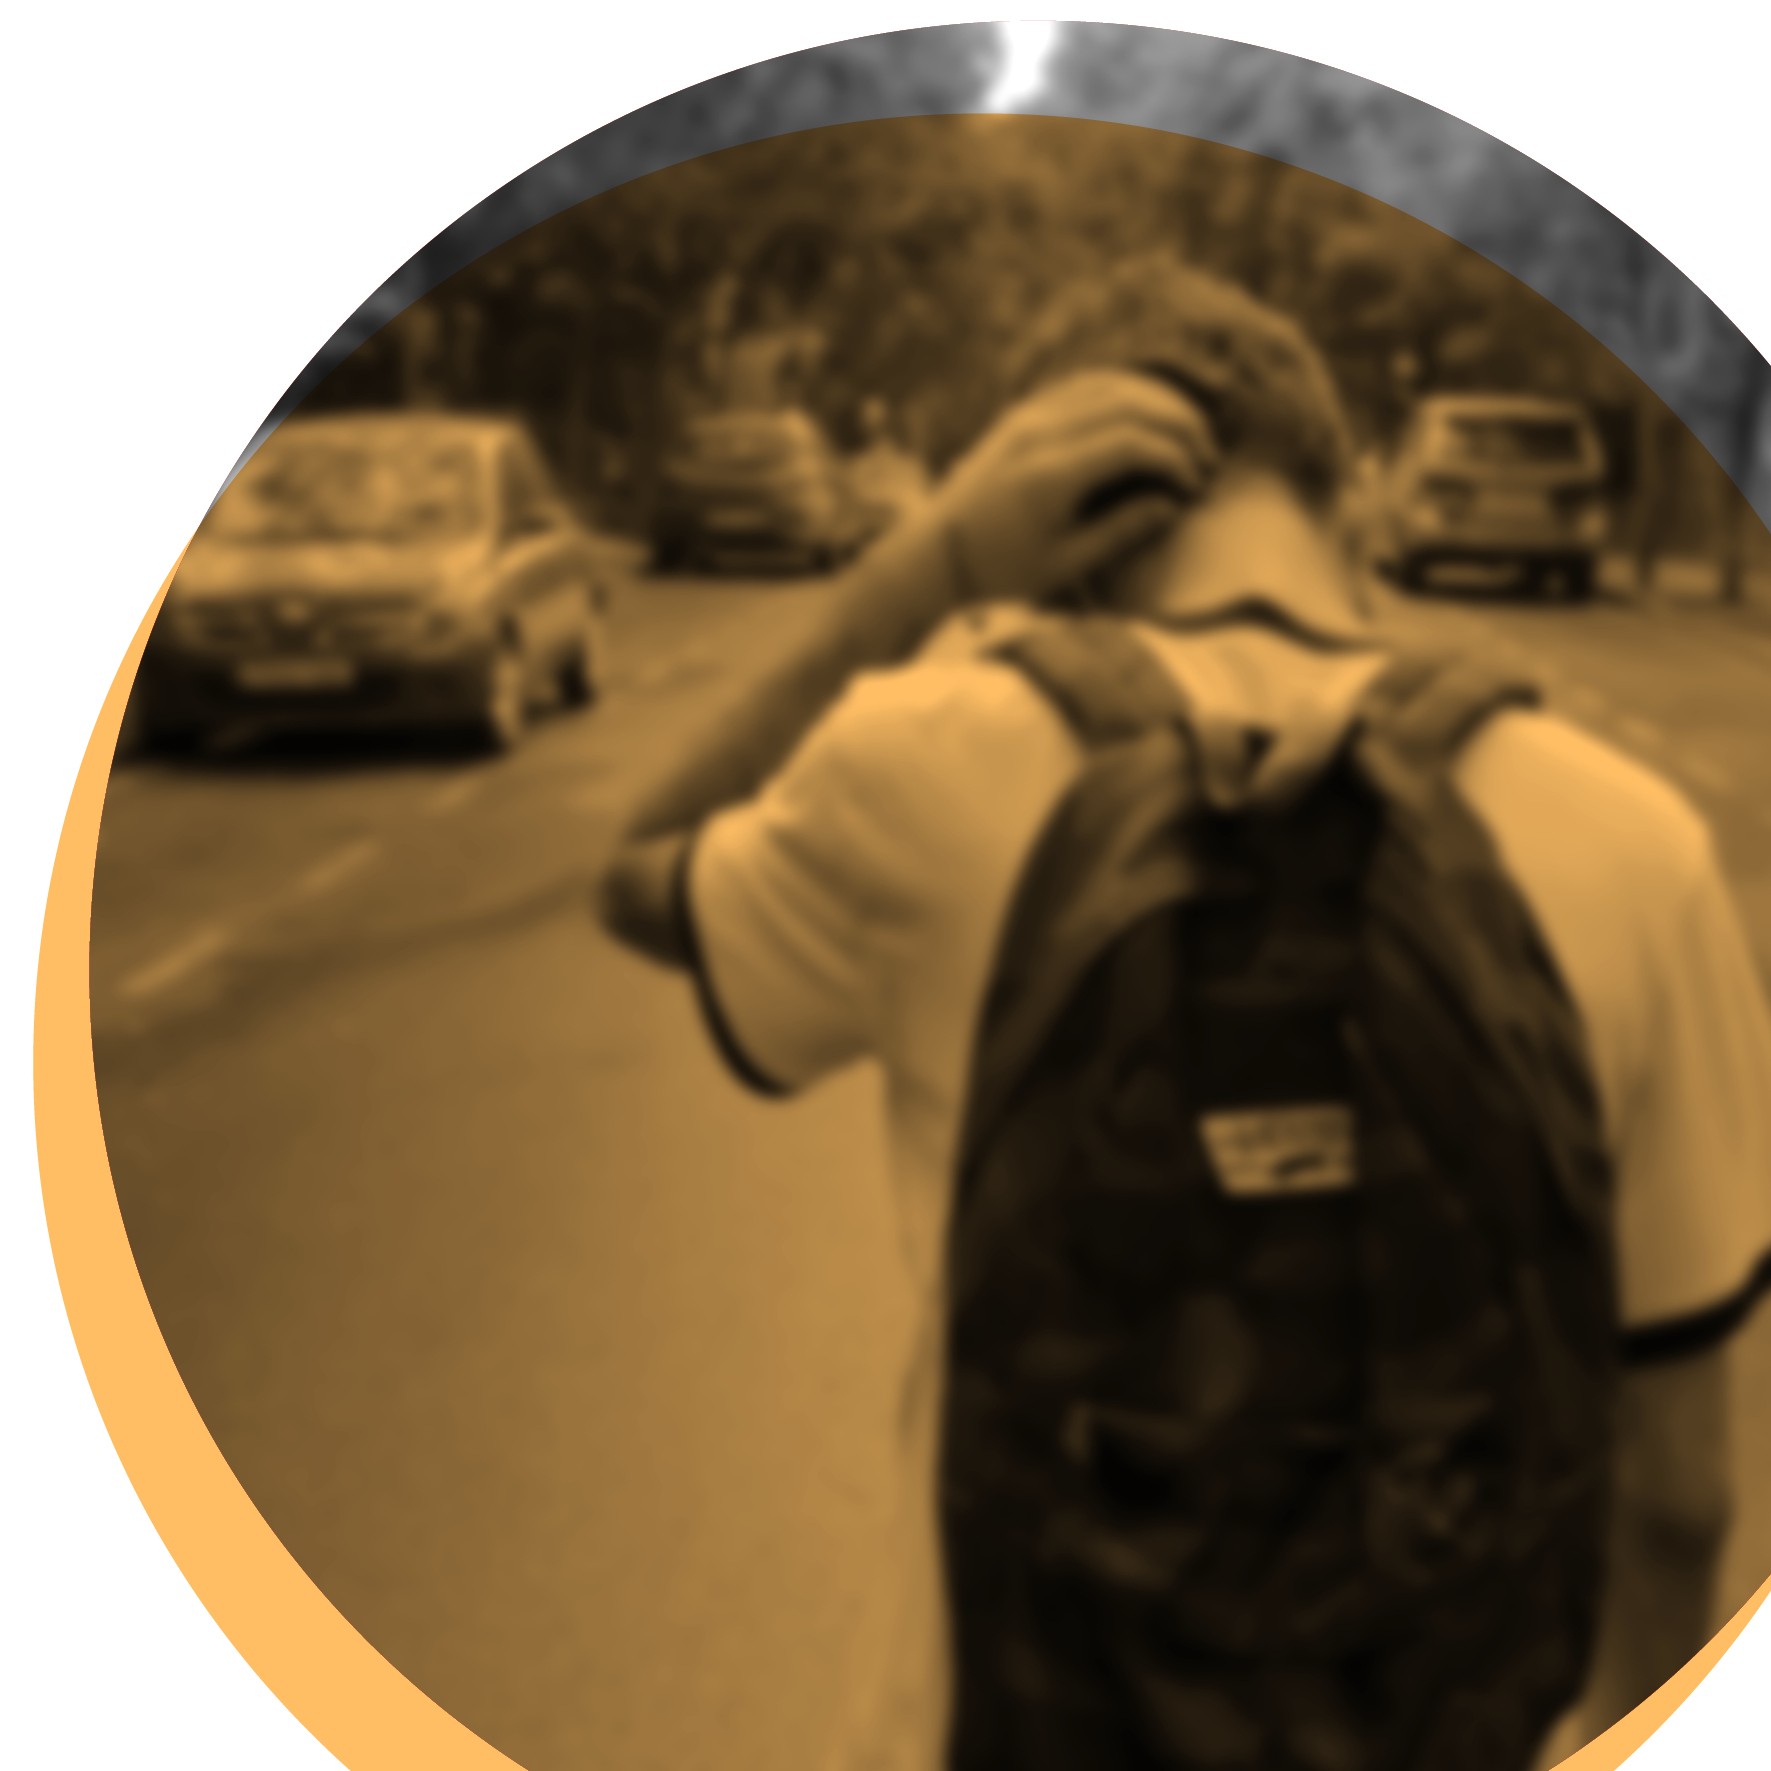 Image of a teenage boy wearing a backpack inside a large yellow circle